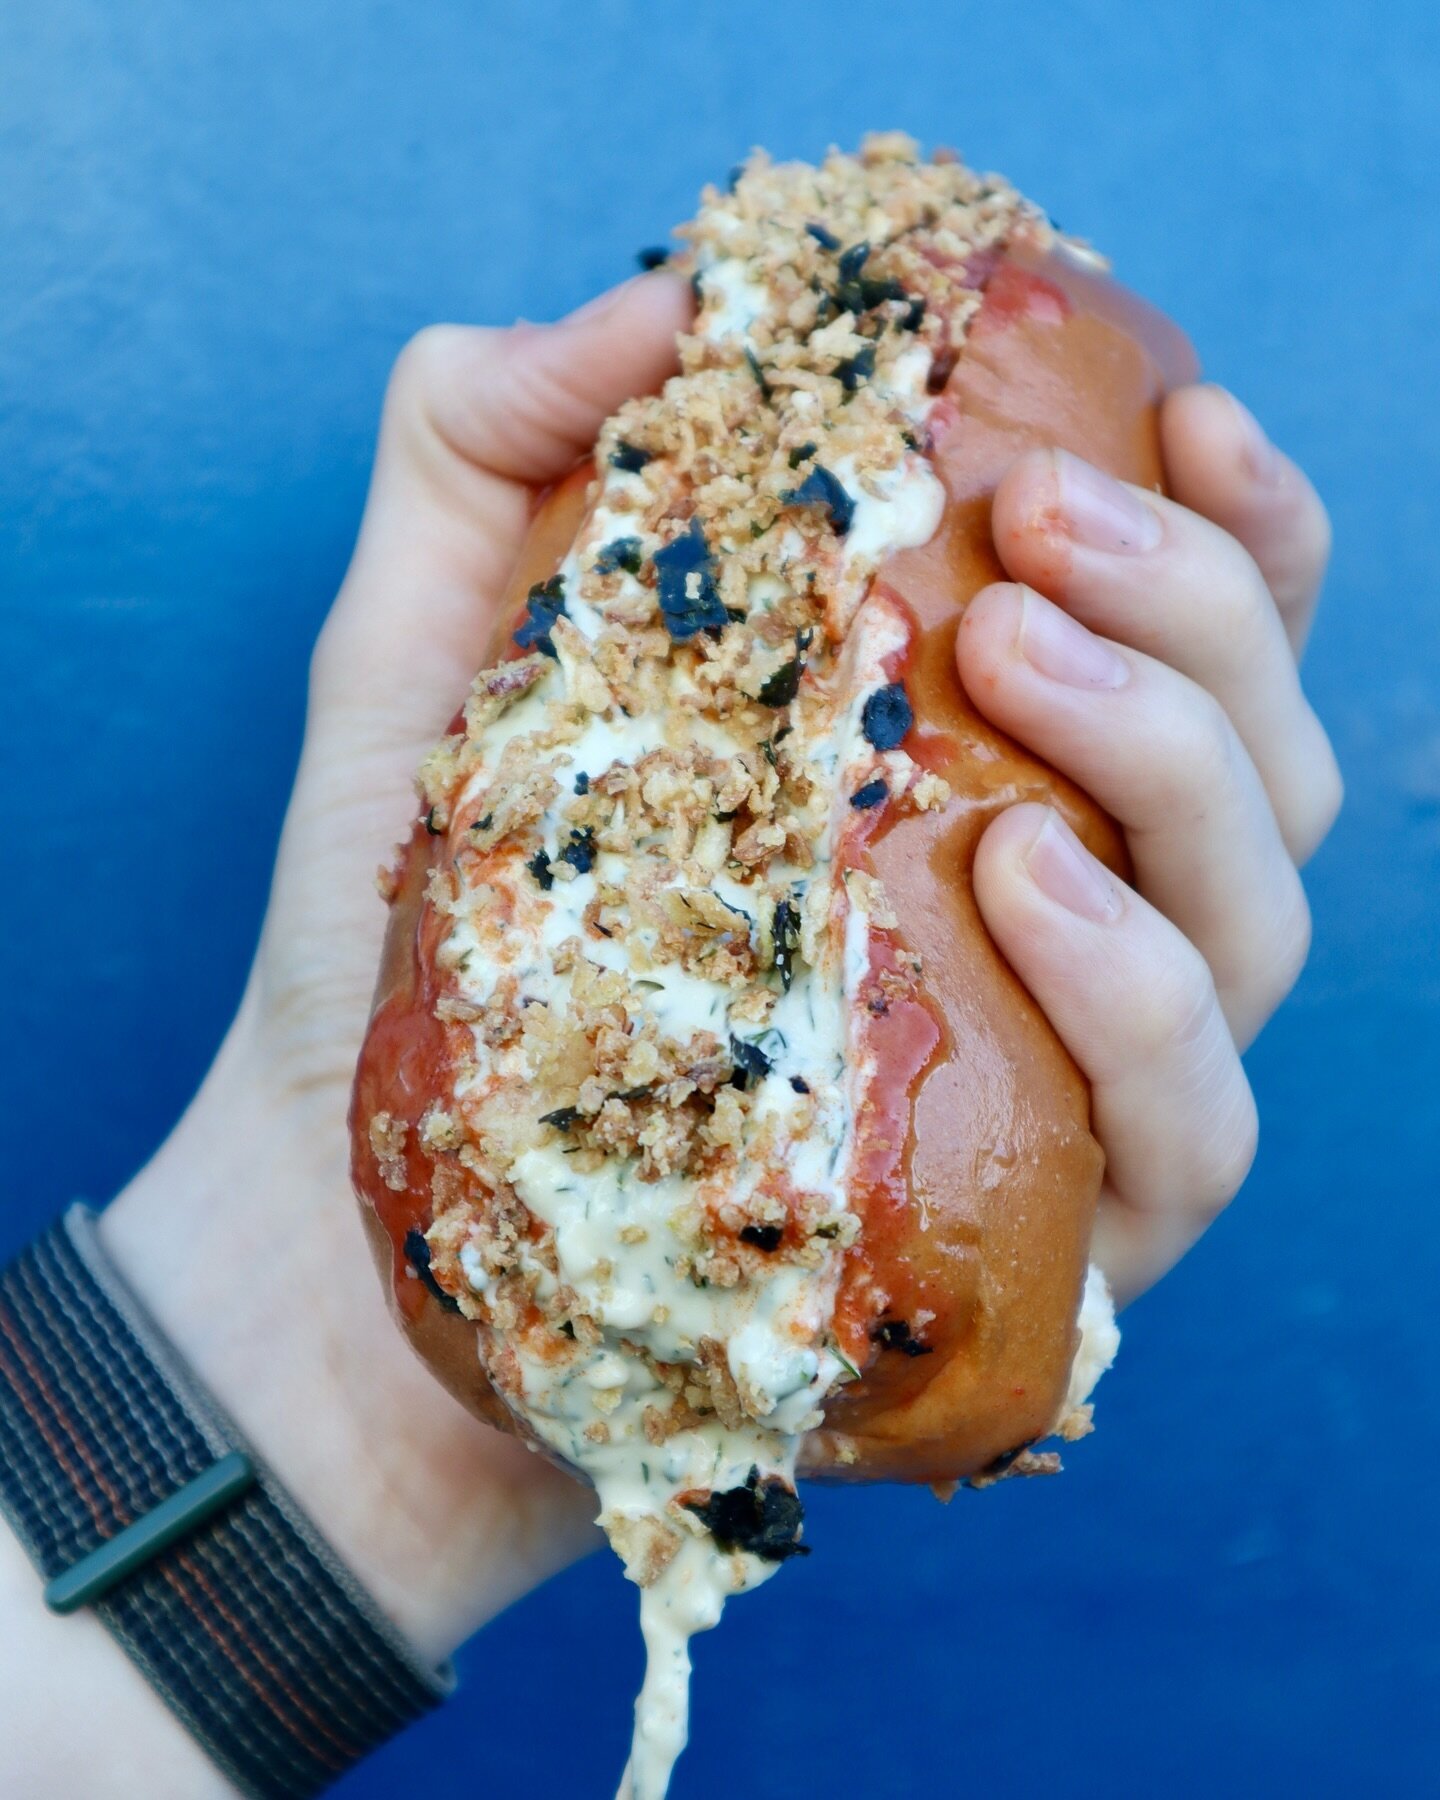 Roses are red, hot dogs are blue&hellip;

Open all weekend at wapping wharf as usual. Pop in and sample one of our classics!

.
.
.
.
.
.
#feelingblue #hotdogs #wappingwharf #bristolfood #bristolfoodie #bristolsmallbusiness #fastfooduk #bluecheese #b